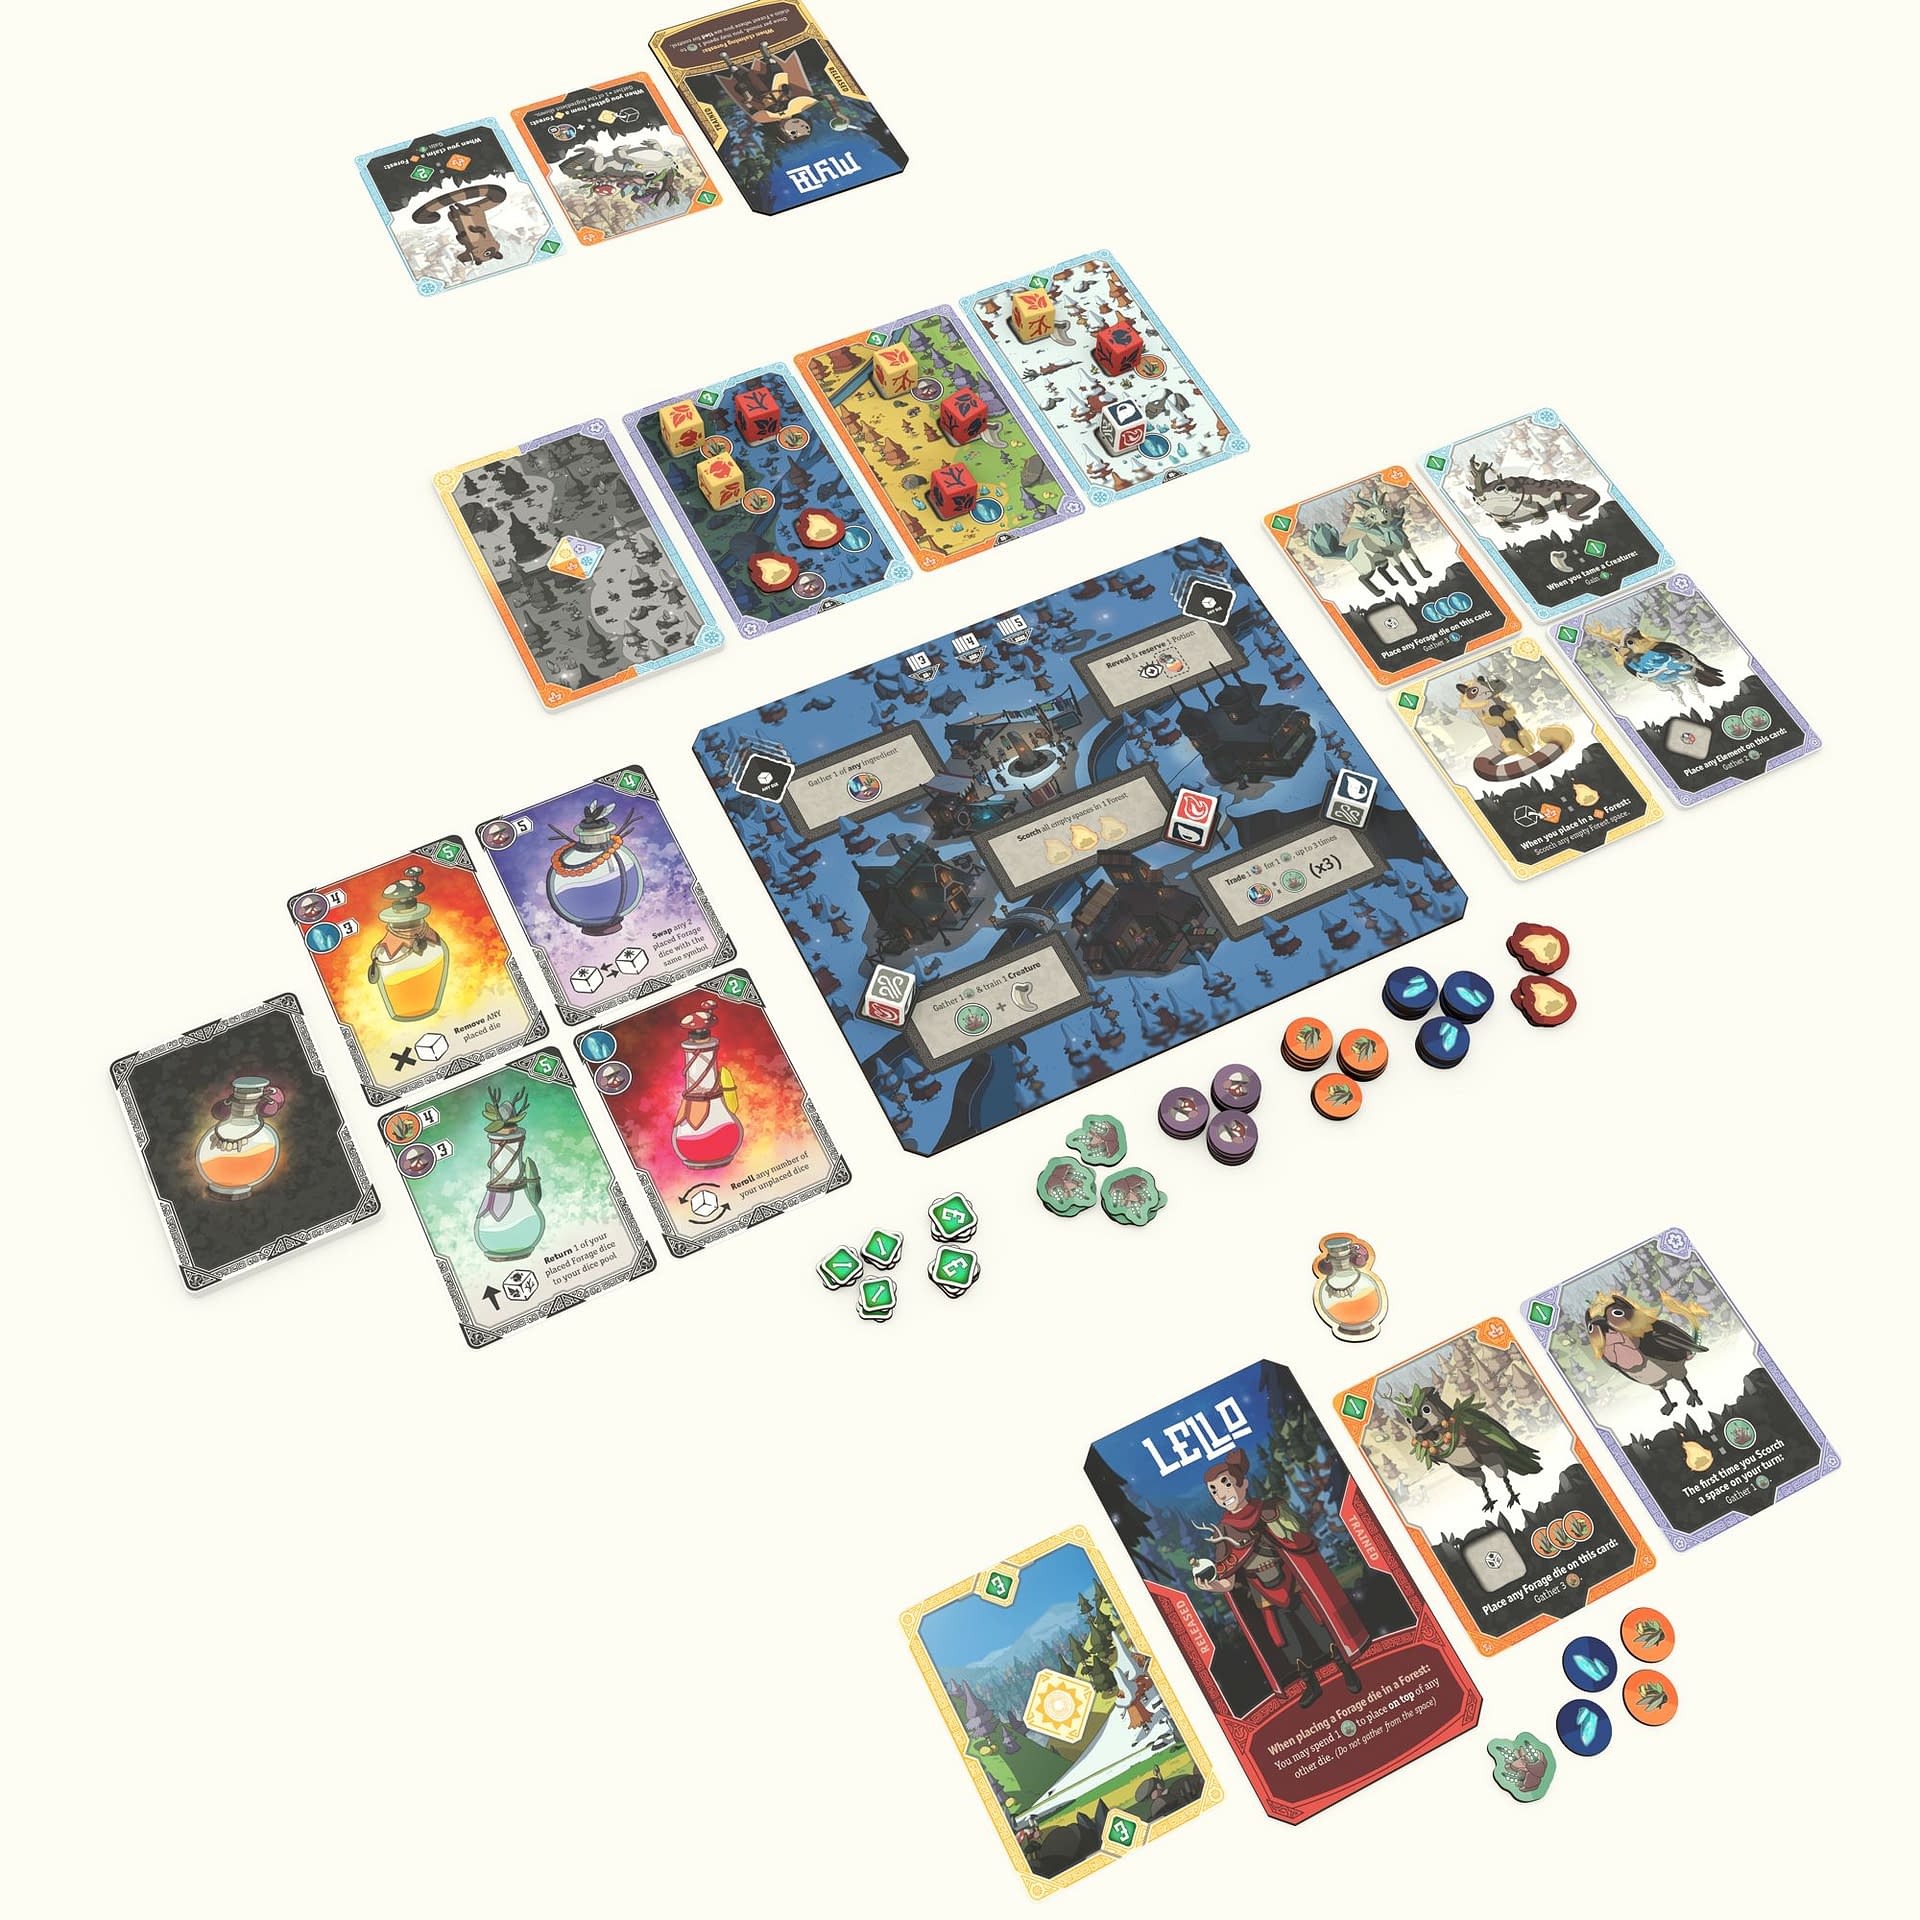 Brew, A Game By Pandasaurus Games, Is Now Available To Pre-Order